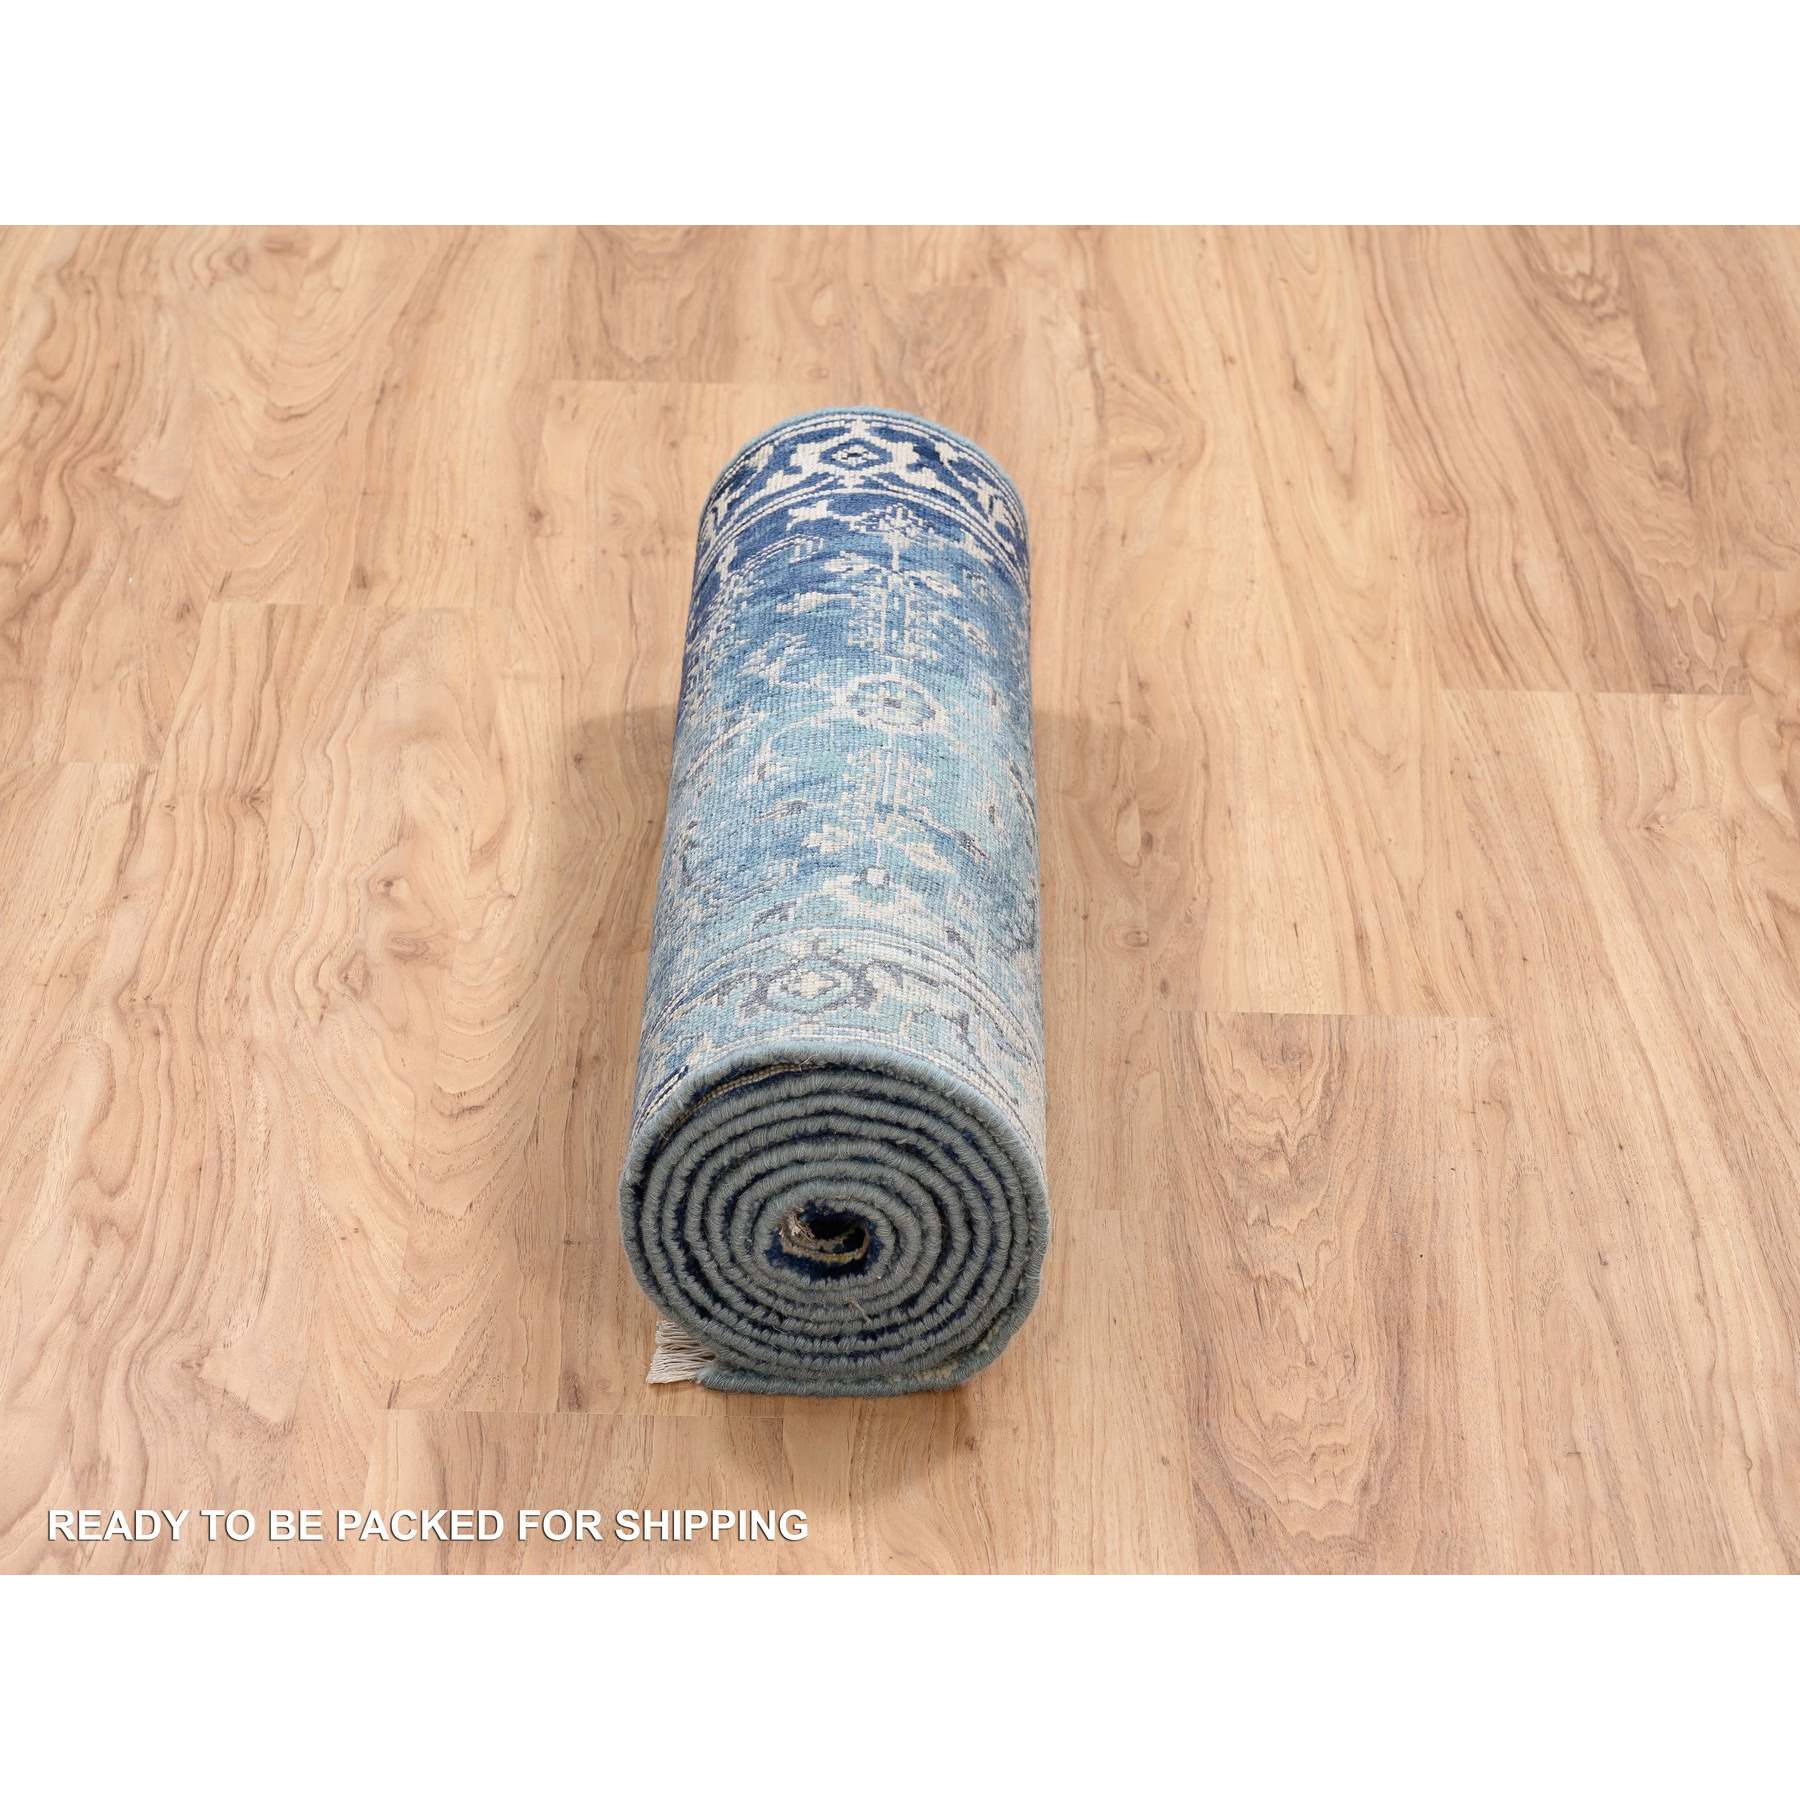 Transitional-Hand-Knotted-Rug-321780